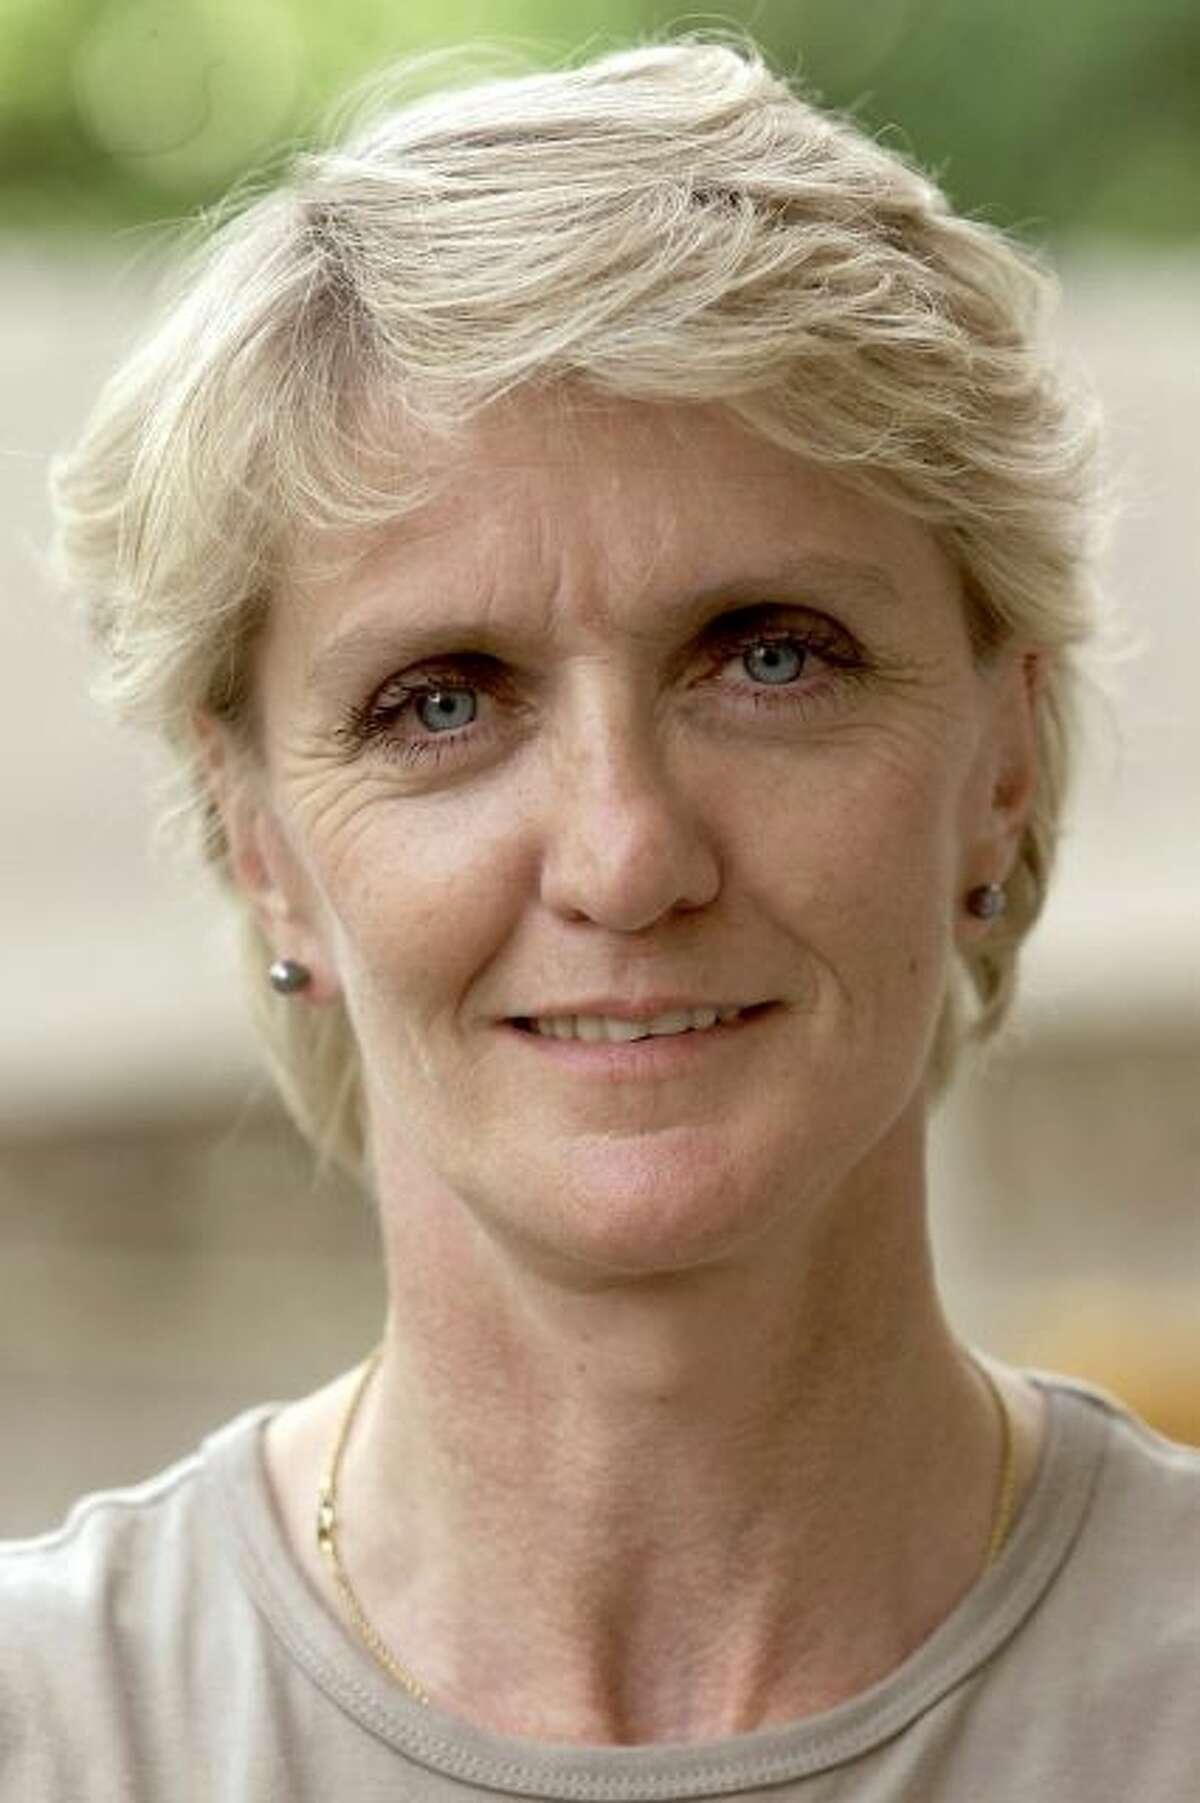 This undated photo shows Associated Press Special Regional Correspondent for Afghanistan and Pakistan, Kathy Gannon. Gannon was wounded and her colleague, photographer Anja Niedringhaus, was killed on Friday, April 4, 2014 when an Afghan policeman opened fire while they were sitting in their car in eastern Afghanistan. (AP Photo)